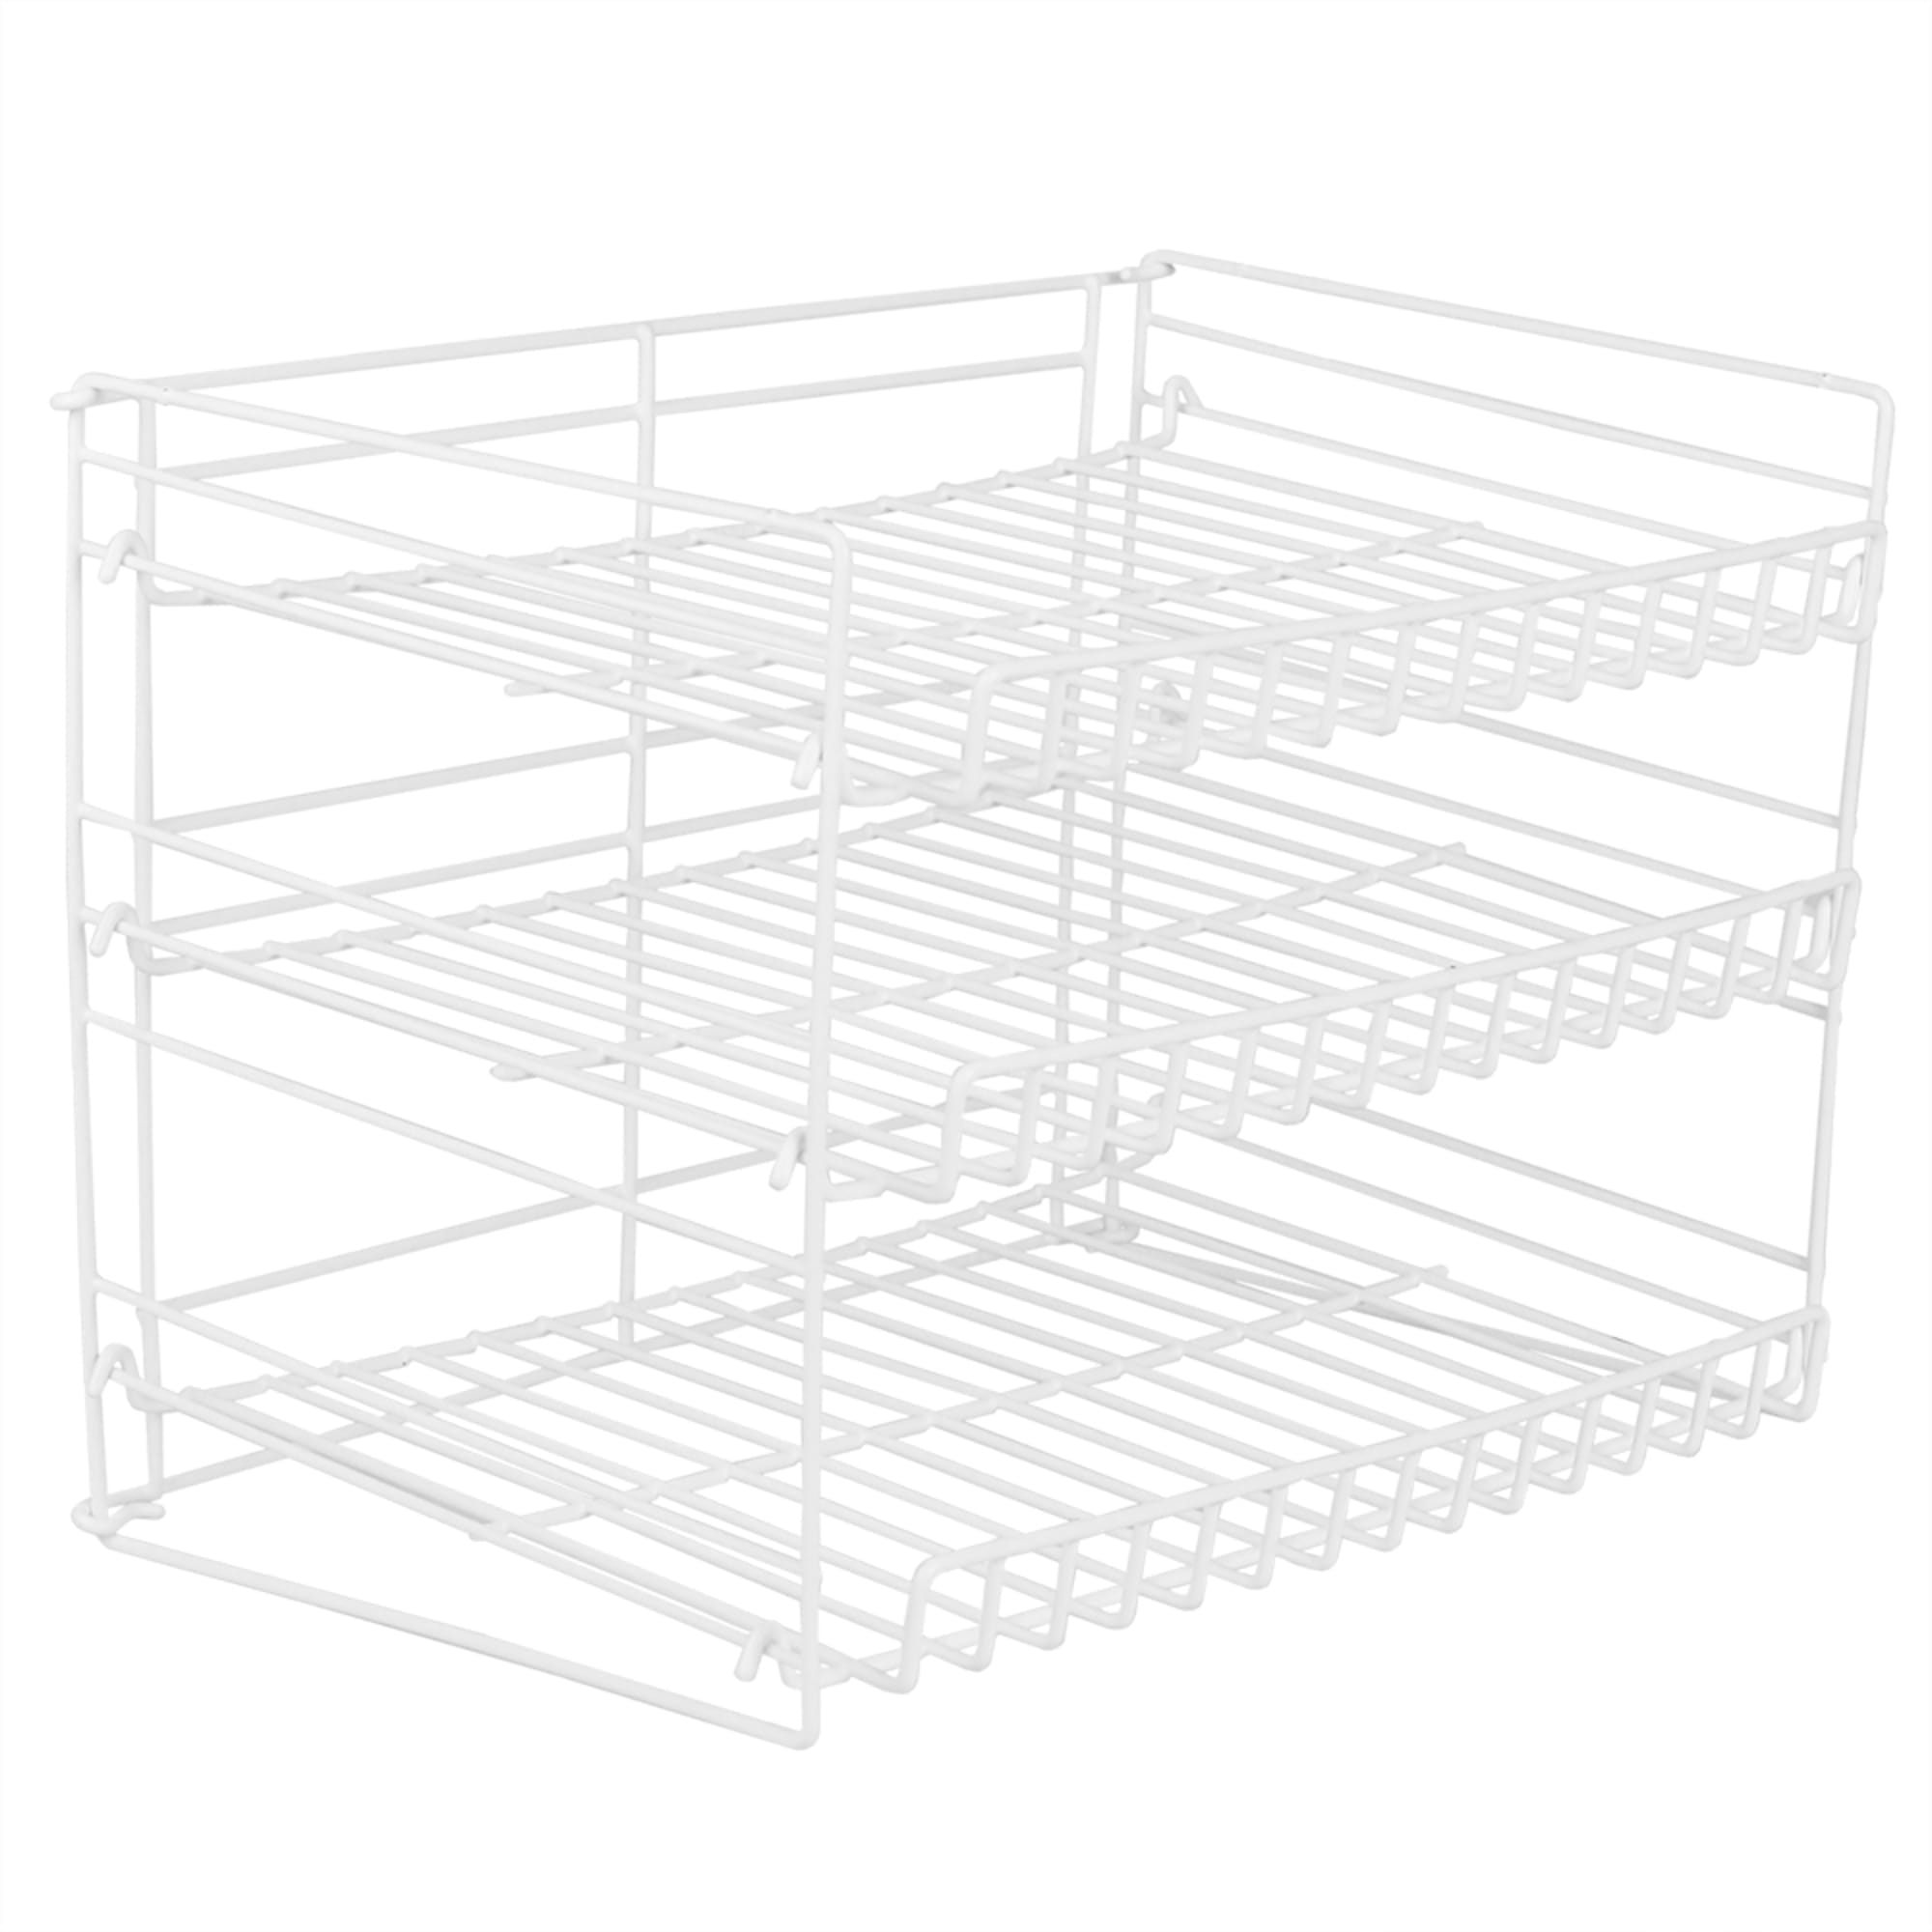 Home Basics 3-Tier Can Organizer $10.00 EACH, CASE PACK OF 6